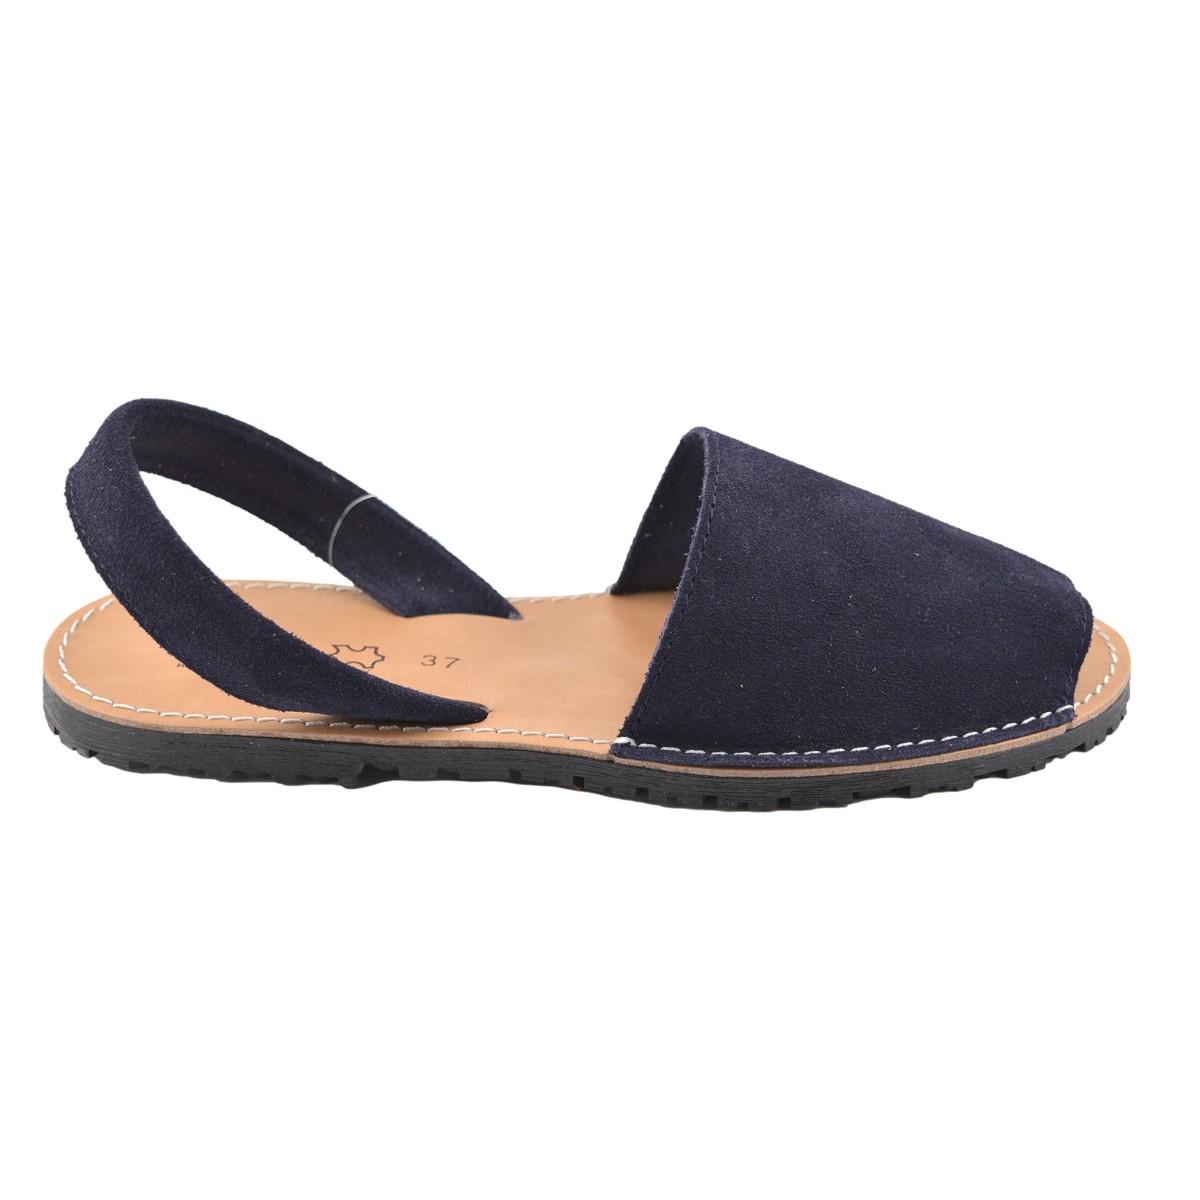 Avarcas Menorquinas navy leather sandals by CBP